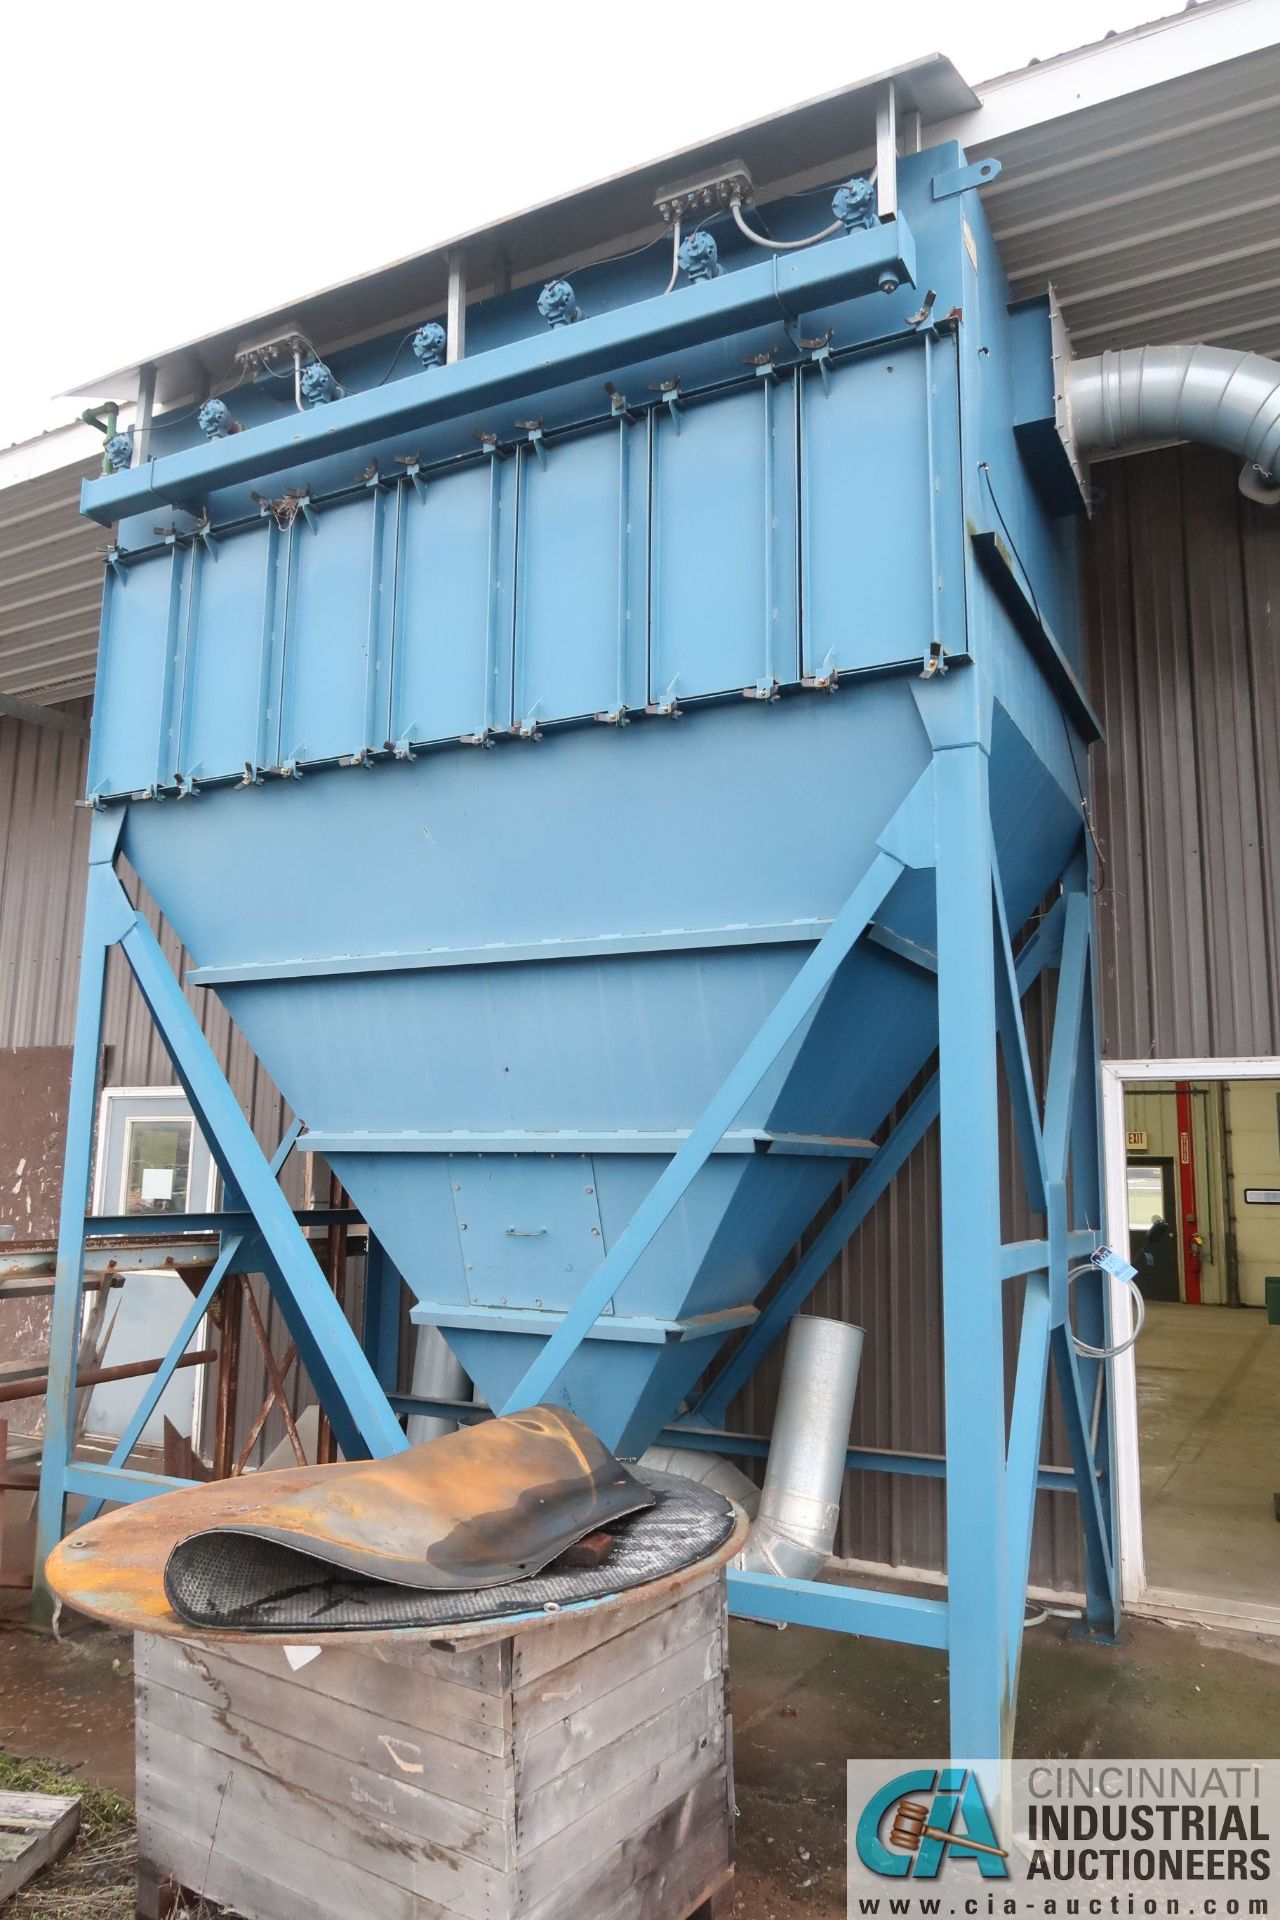 WHEELABOUT MODEL 57MOD36WCC DUST COLLECTOR; S/N ....7095 WITH HARTZELL FAN UNIT - Image 2 of 5